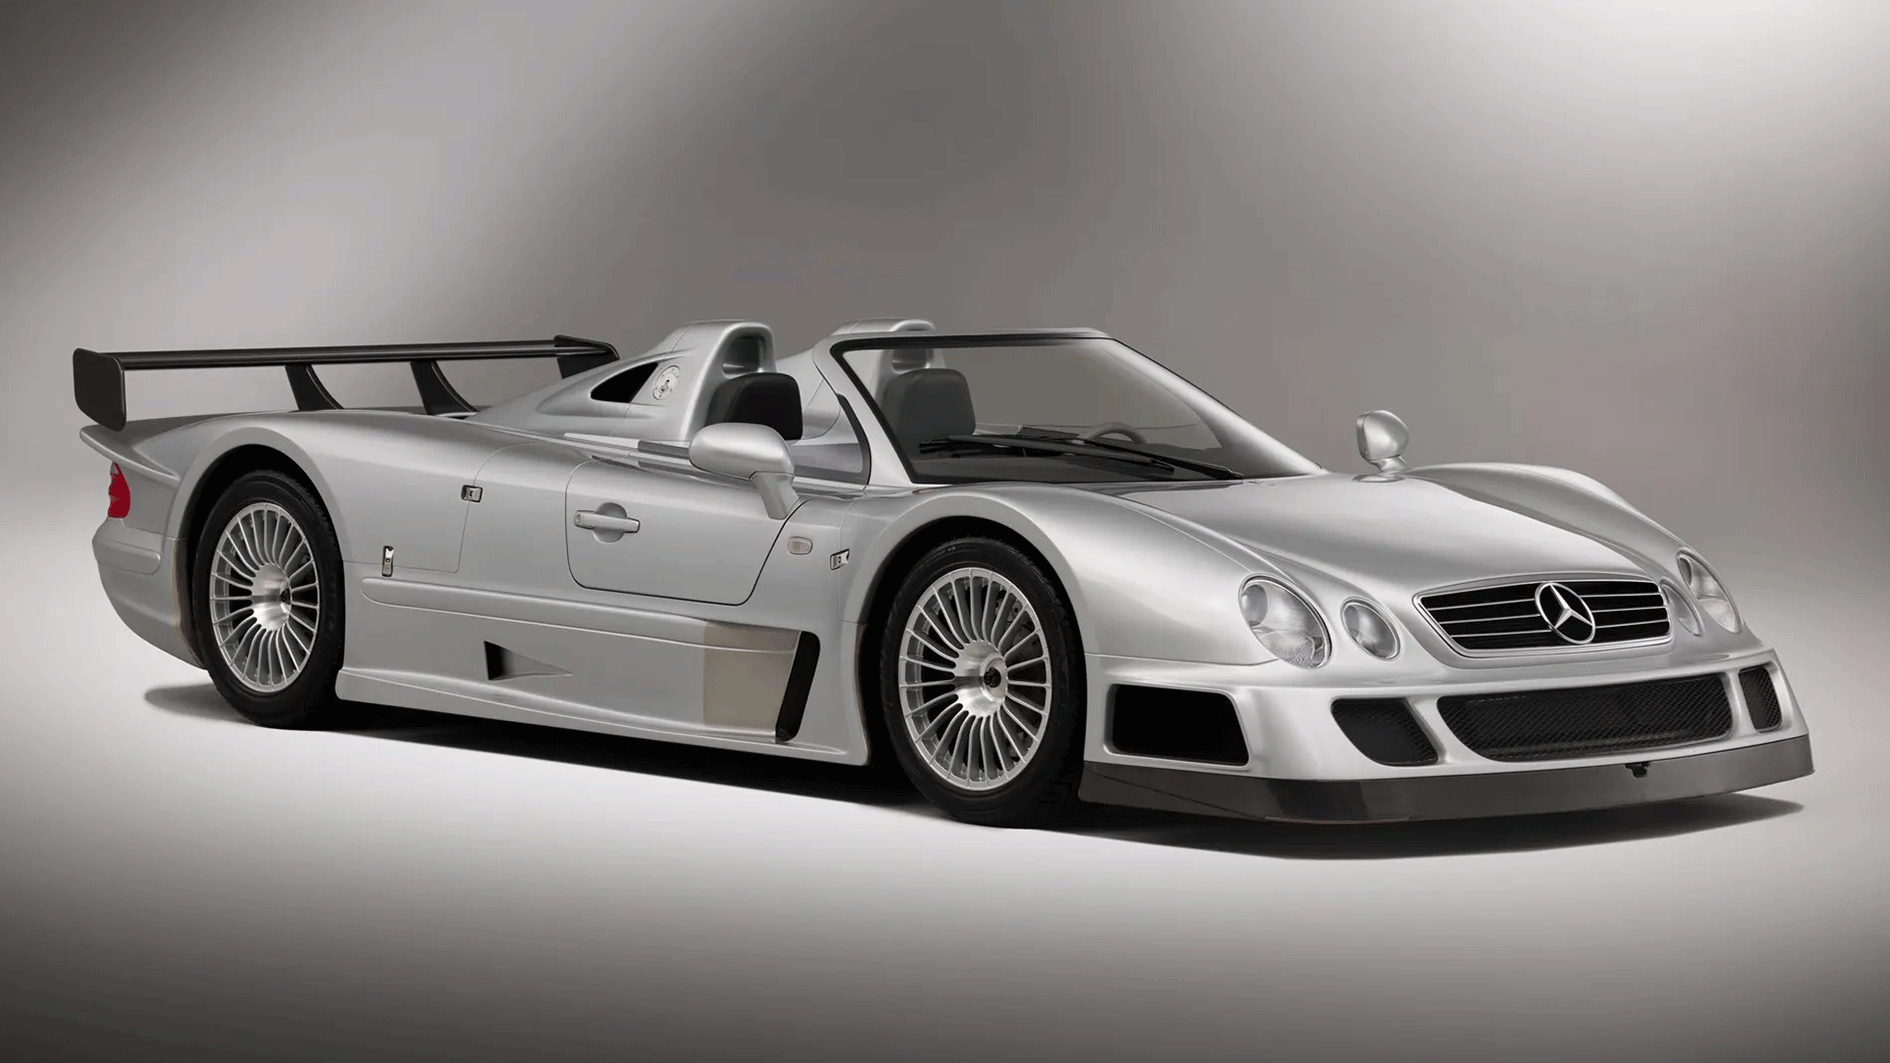 amg, mercedes-amg, mercedes-benz, daimler, singapore, cycle & carriage, clk gtr, clk dtm, mercedes-amg, mercedes, mercedes-benz, motorsports, clk gtr, mercedes-benz amg clk gtr duo could fetch over usd$22m at auction